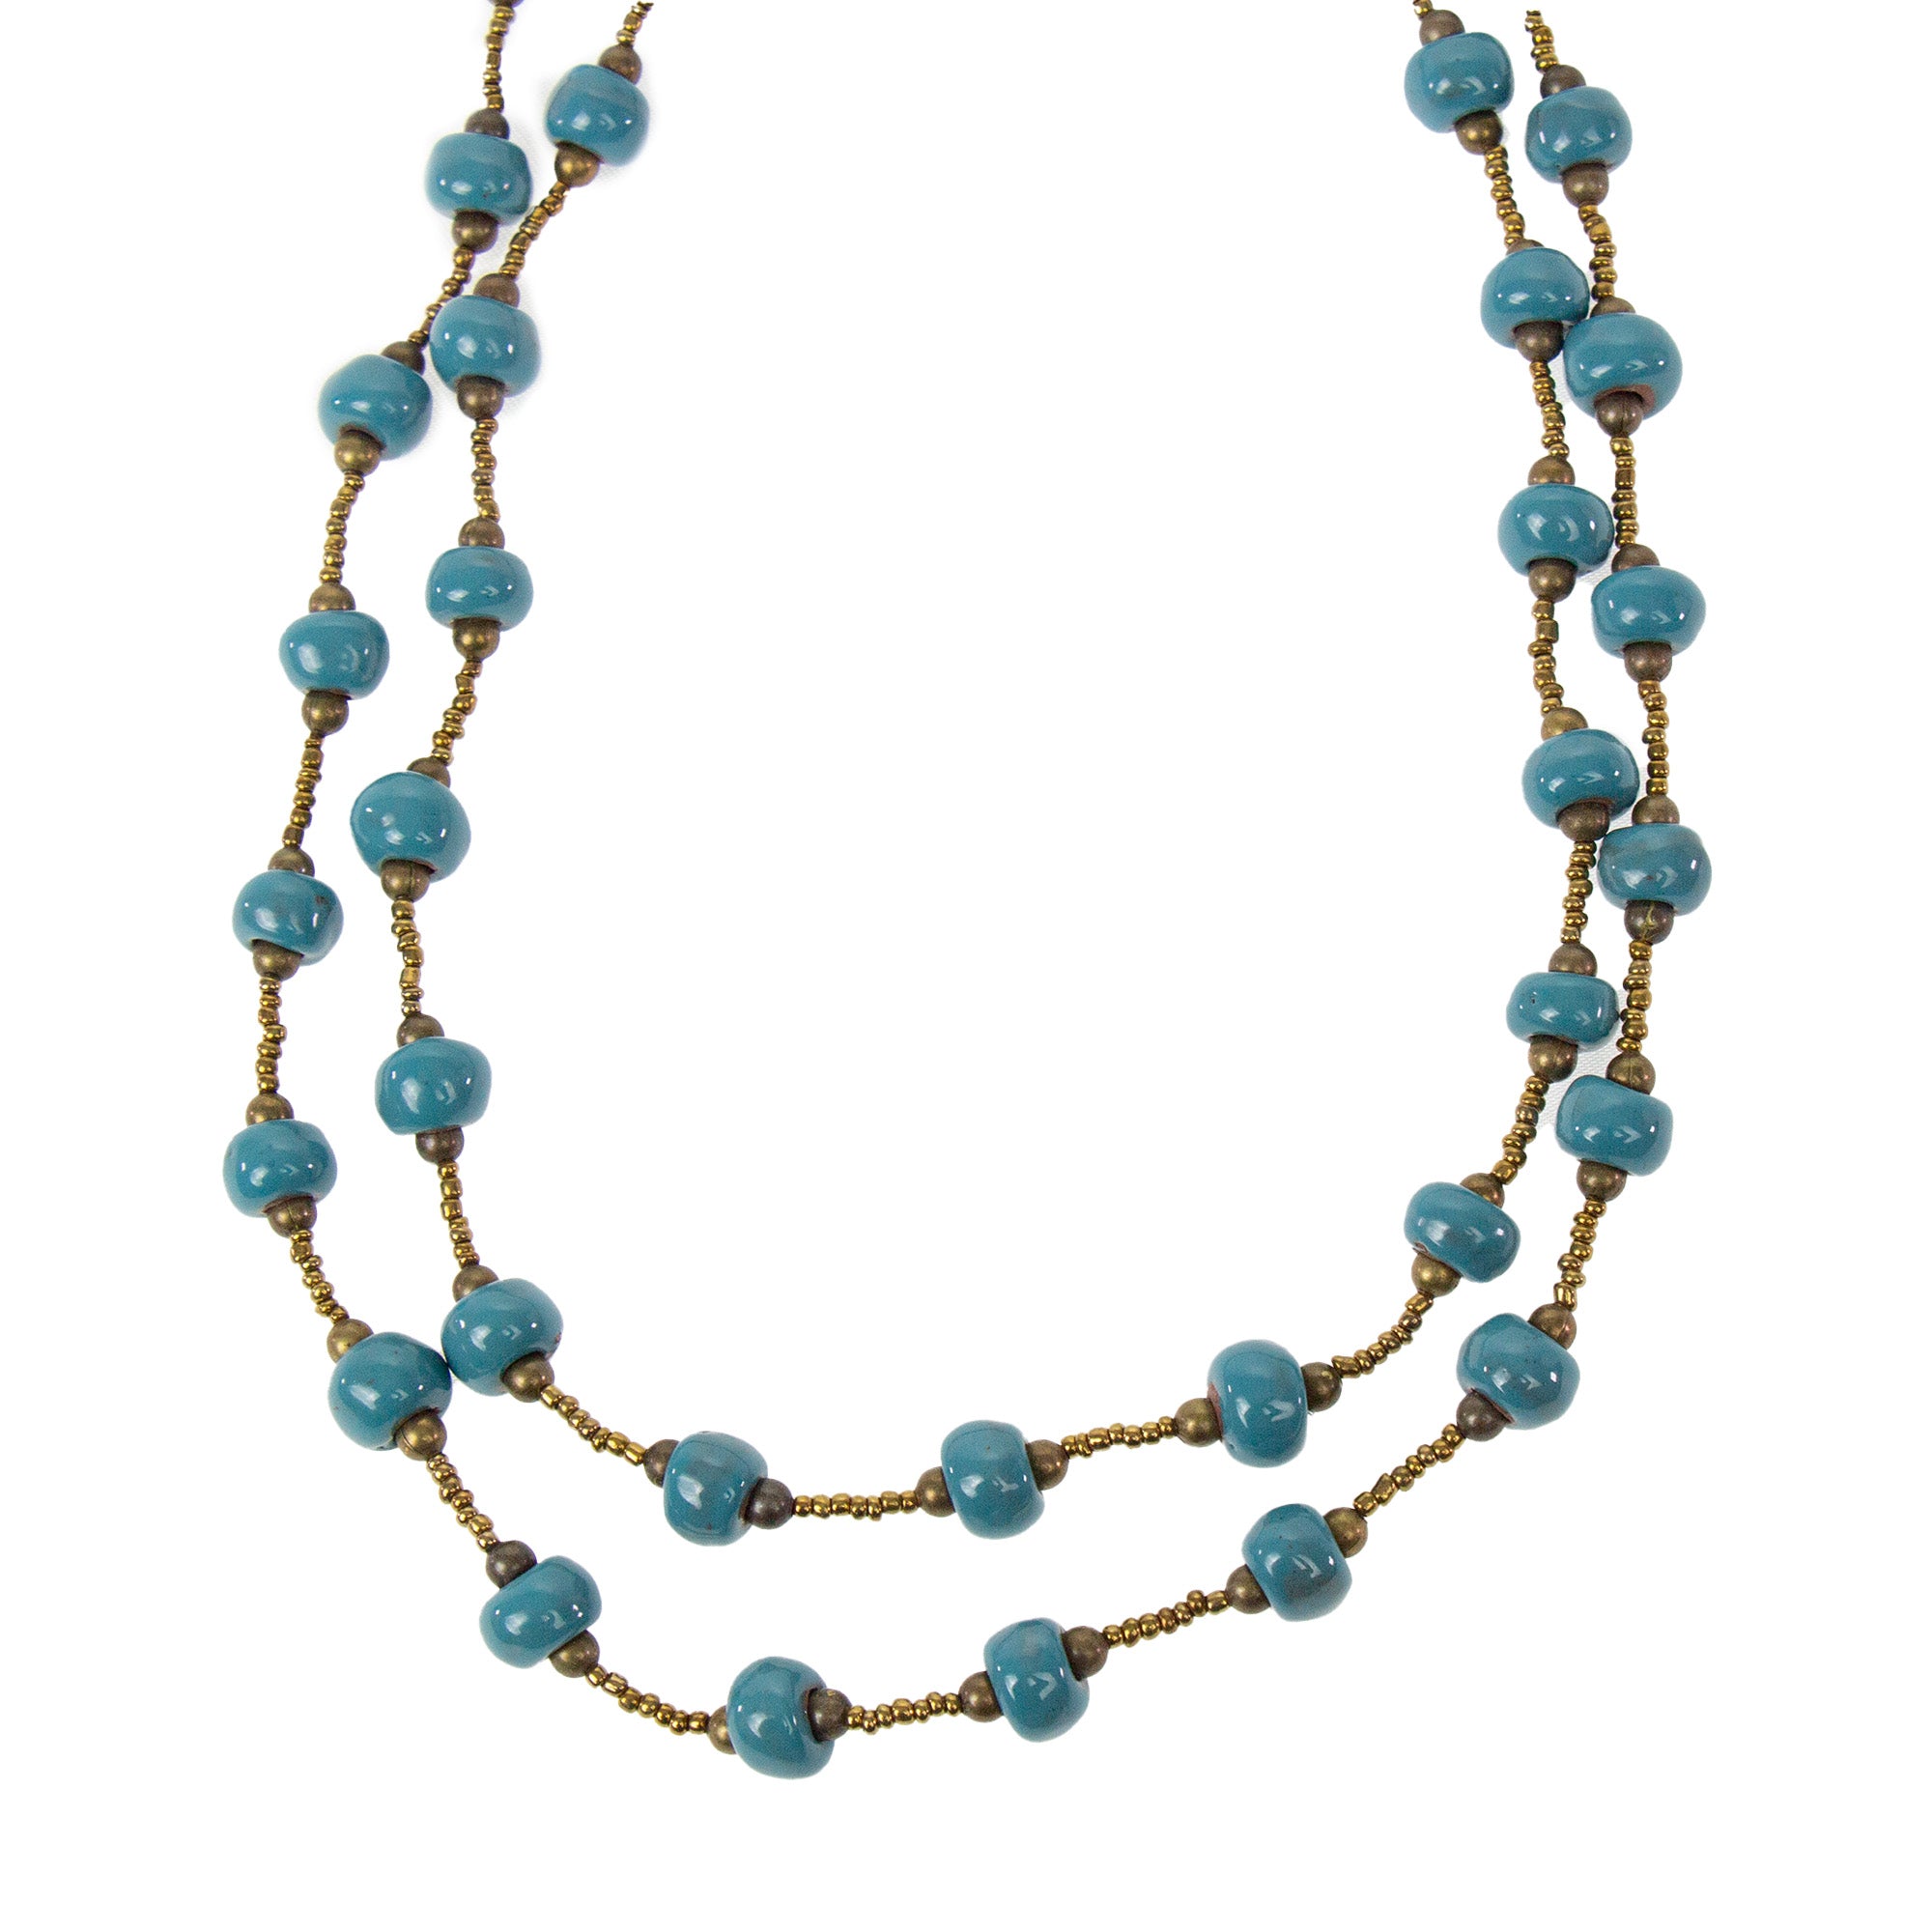 Enameled Quickcure Clay Bead Necklace